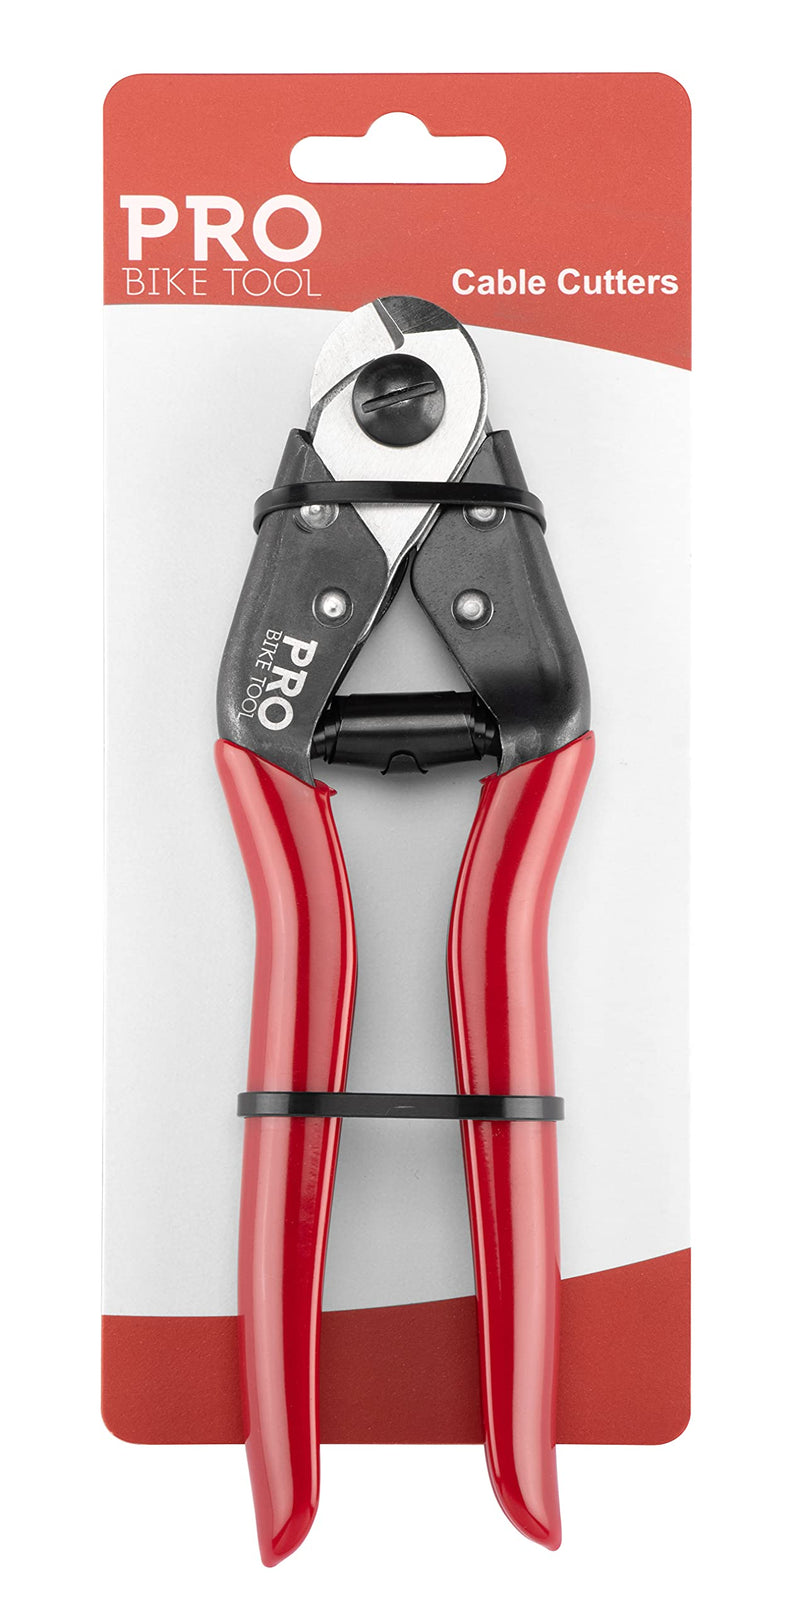 Cable Cutters - Heavy Duty Cable Cutter For Bicycle Wires And Cables